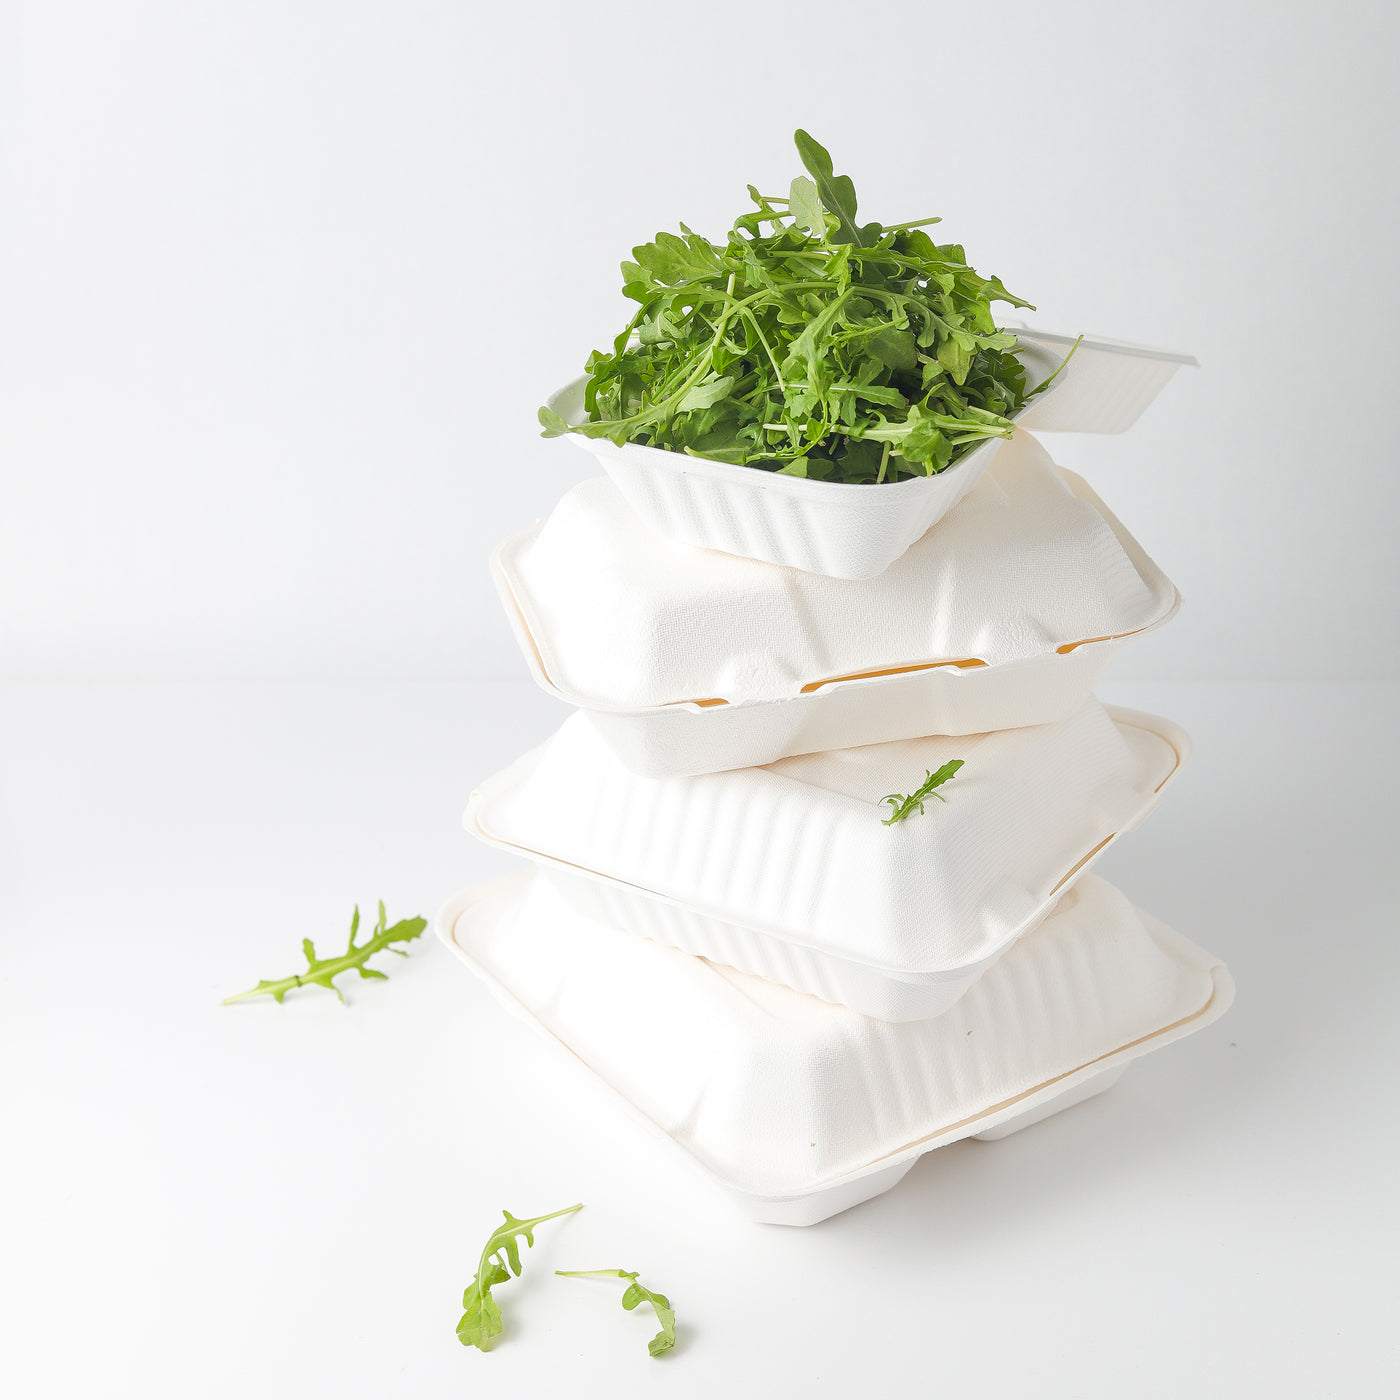 Take Out Containers 8" x 8" x 3" Sugarcane Bagasse 1-section Hinged Clamshells Compostable